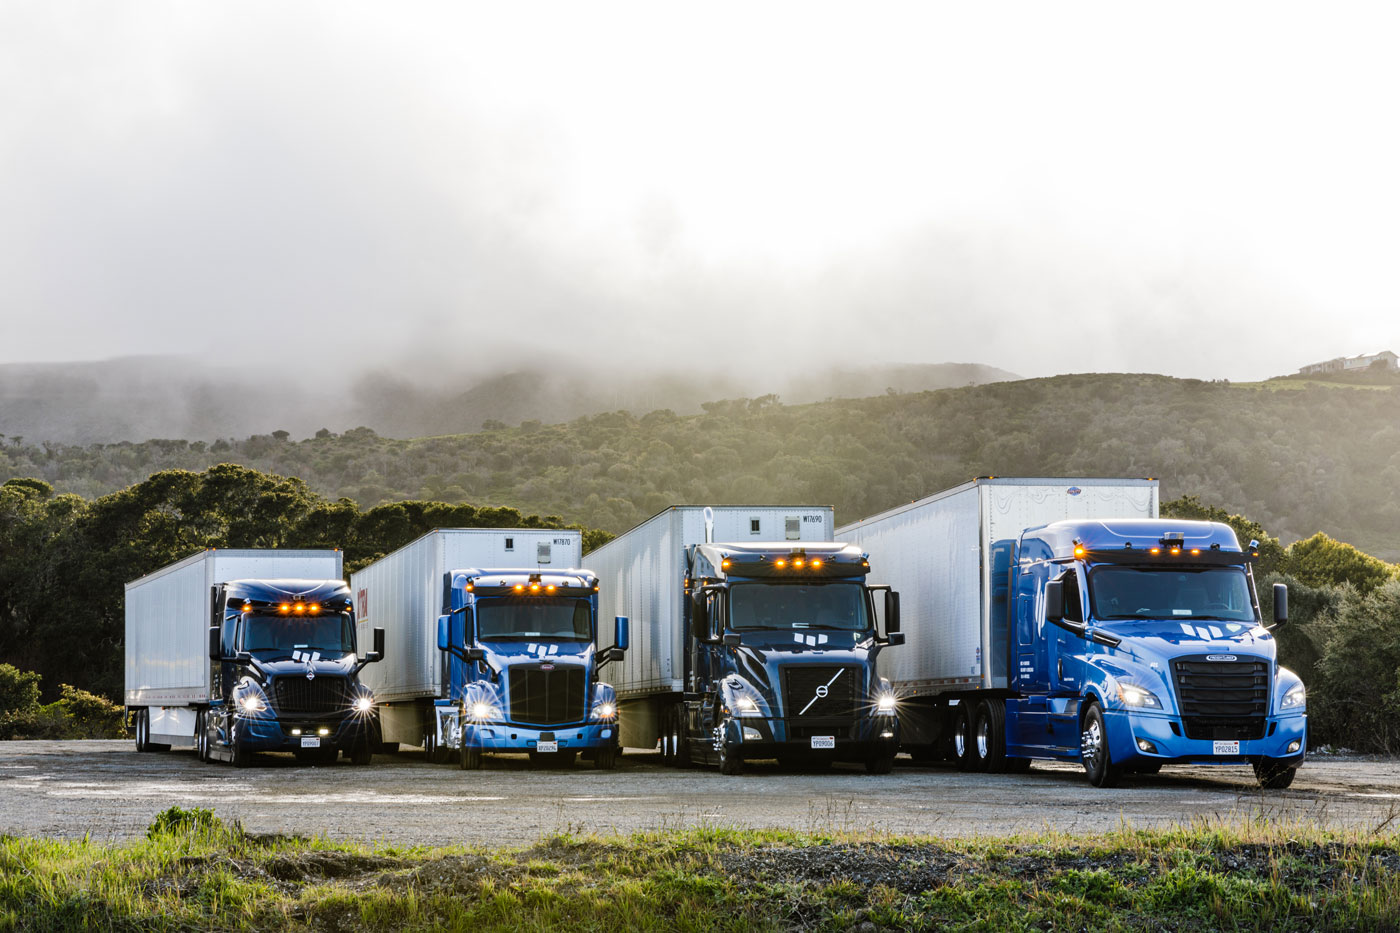 Photo of 4 embark trucks made by different OEMs.